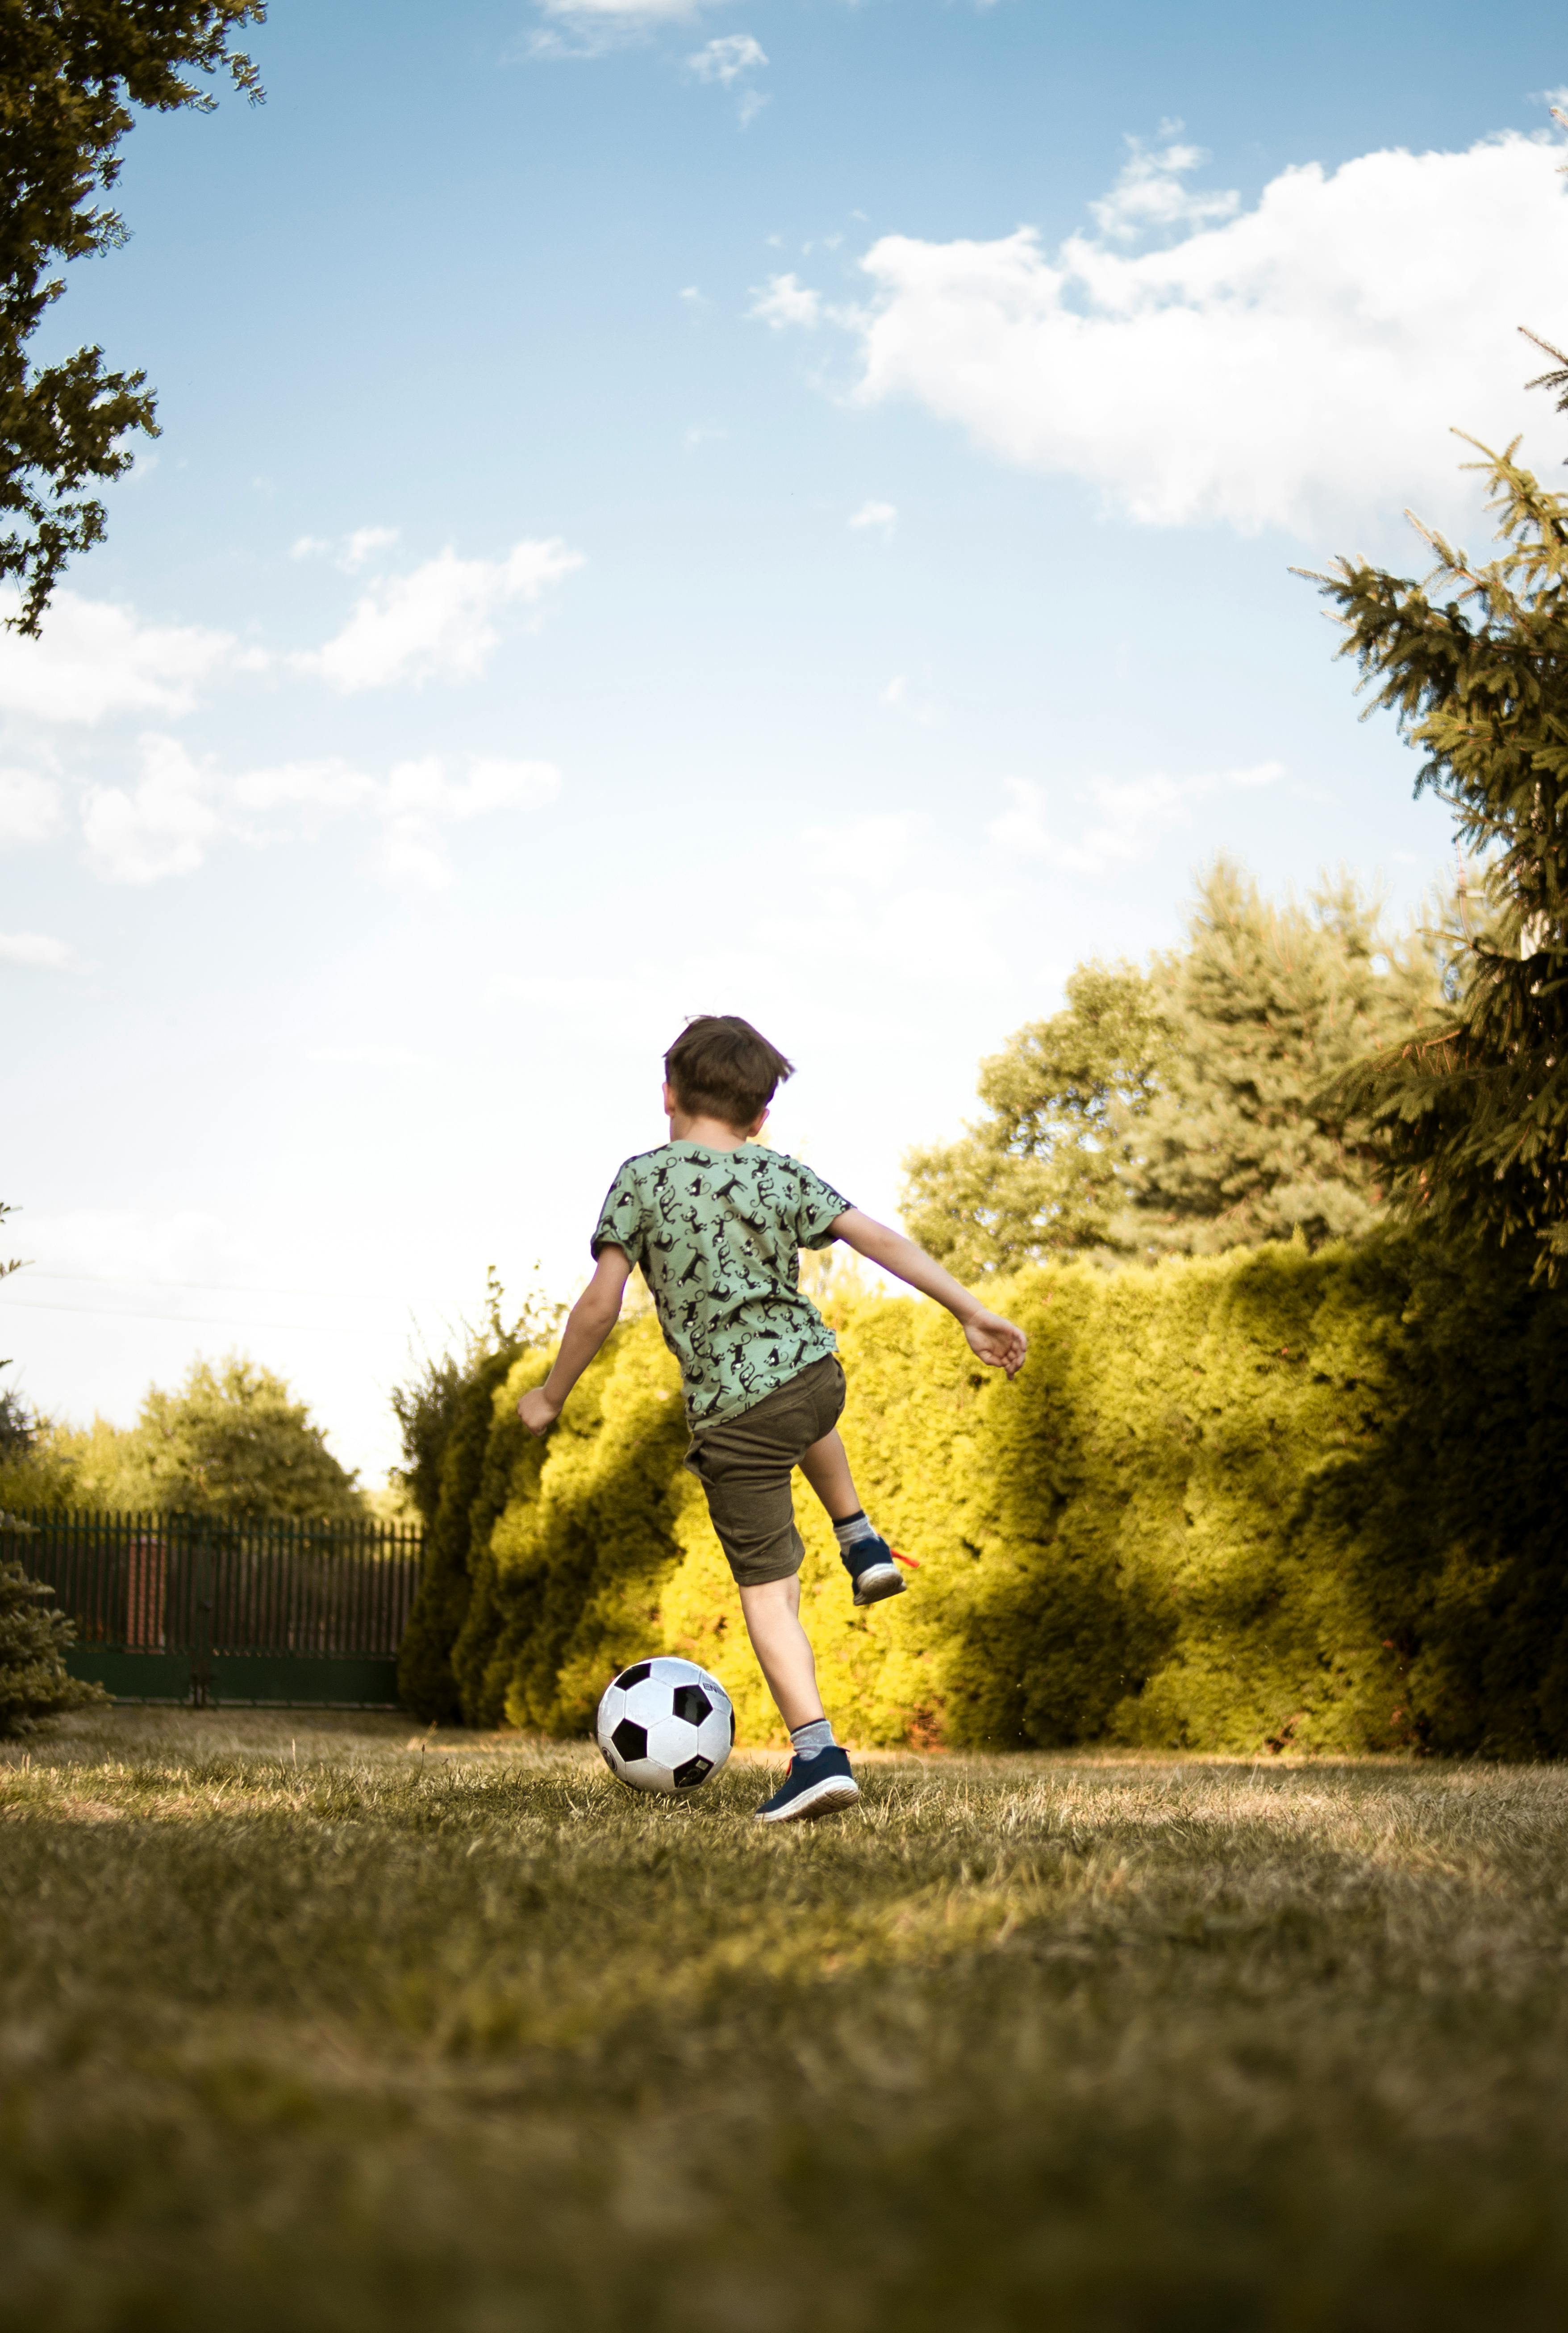 Low-Angle Photo of a Boy Playing Soccer